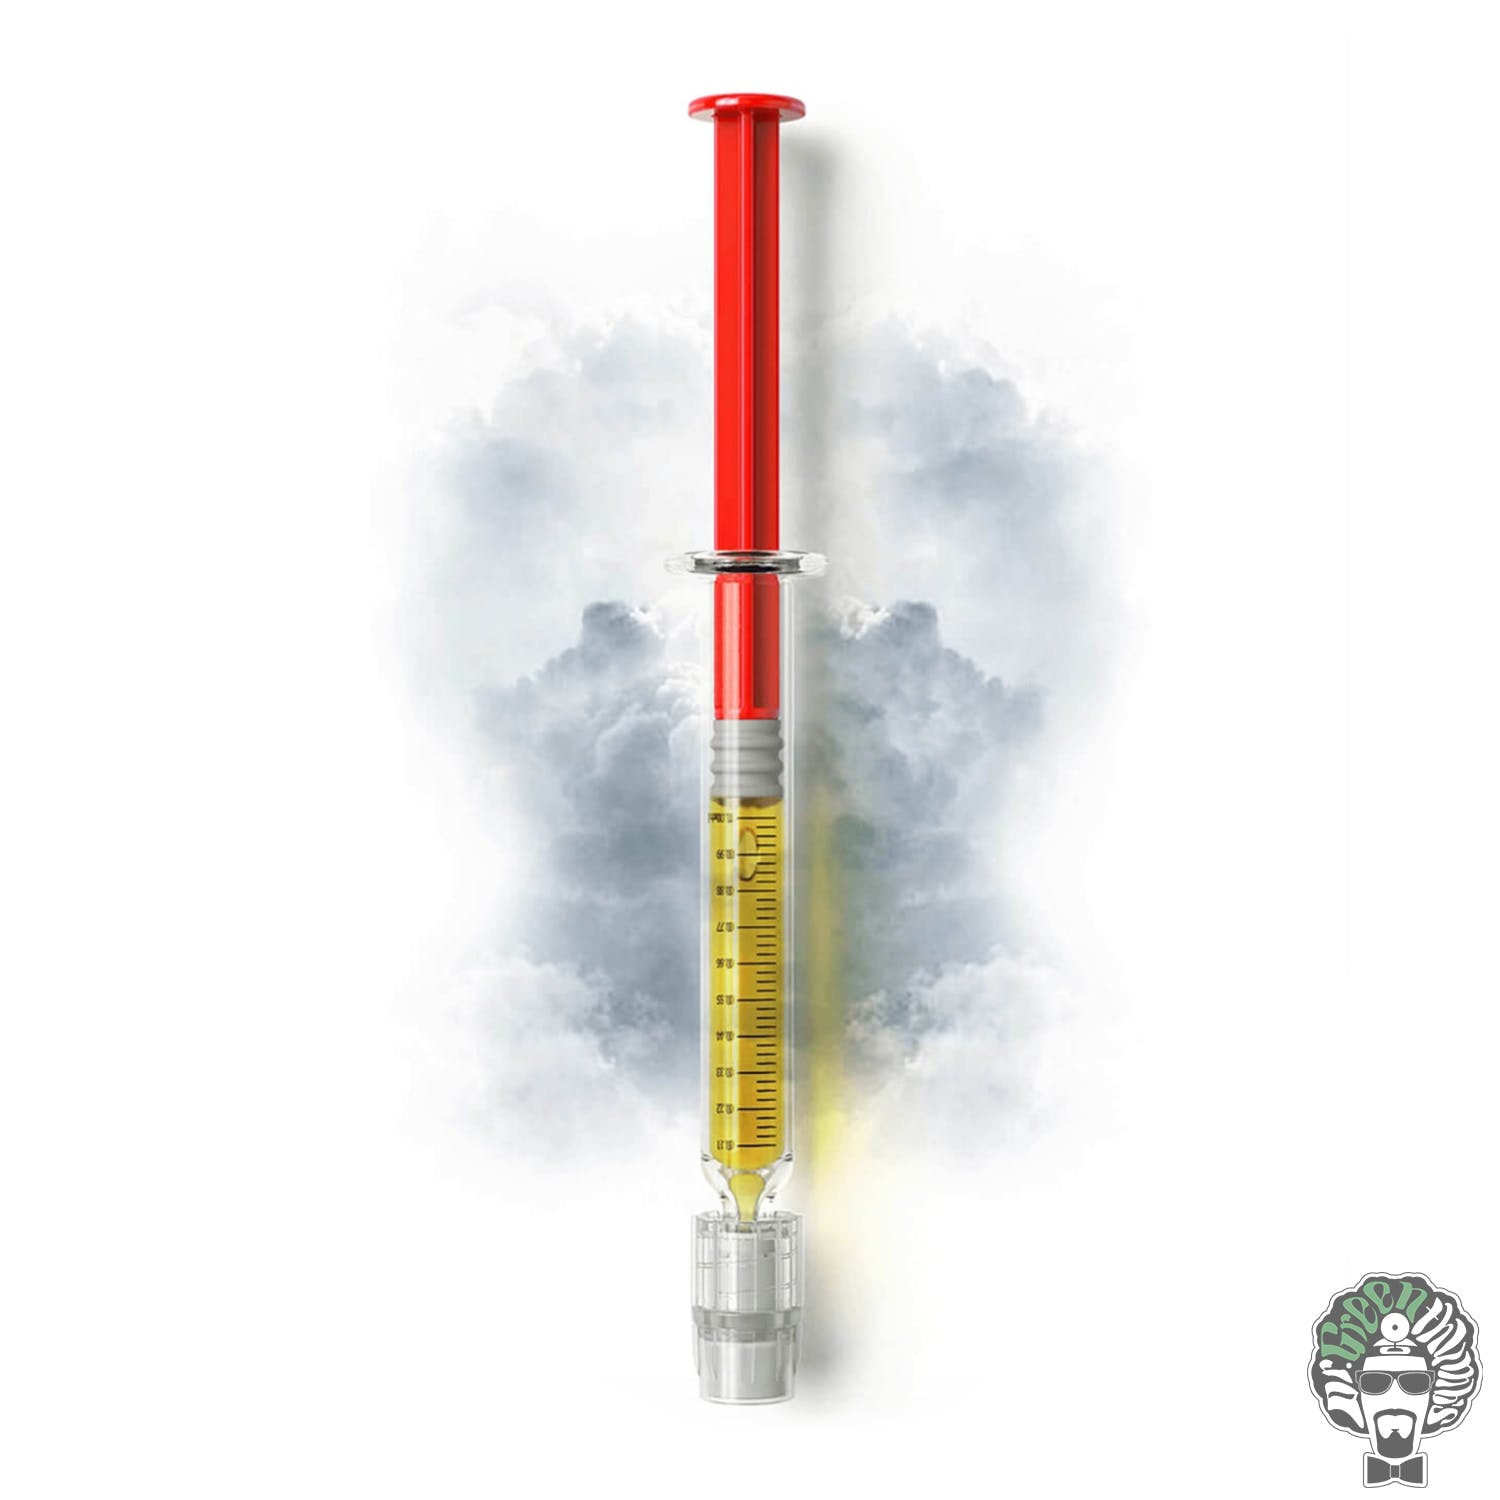 tincture-skywalker-8-refillable-cartridge-tincture-by-bloom